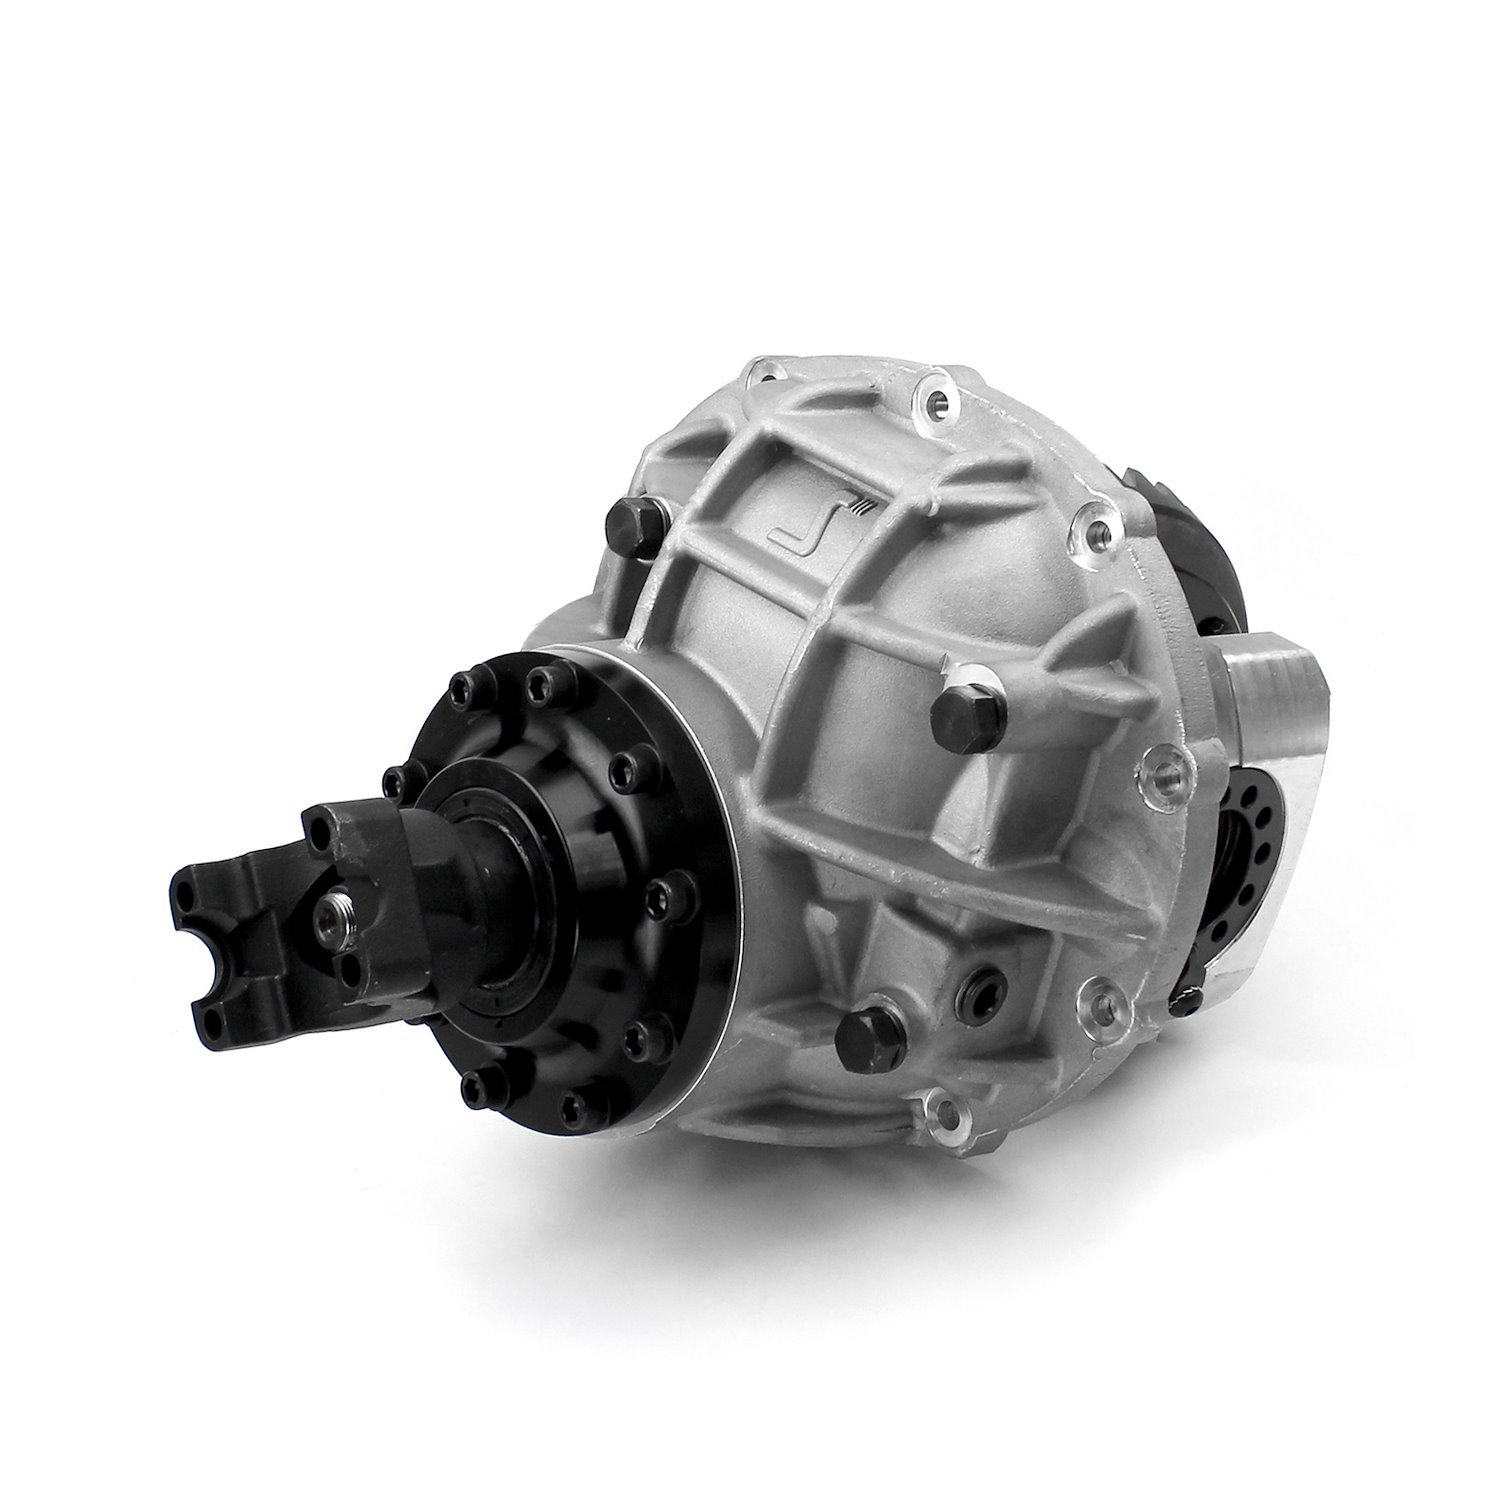 1-215-011-04 Ford 9 in. HD Third Member Assembly, 35-Spline, Ratio: 3.70:1